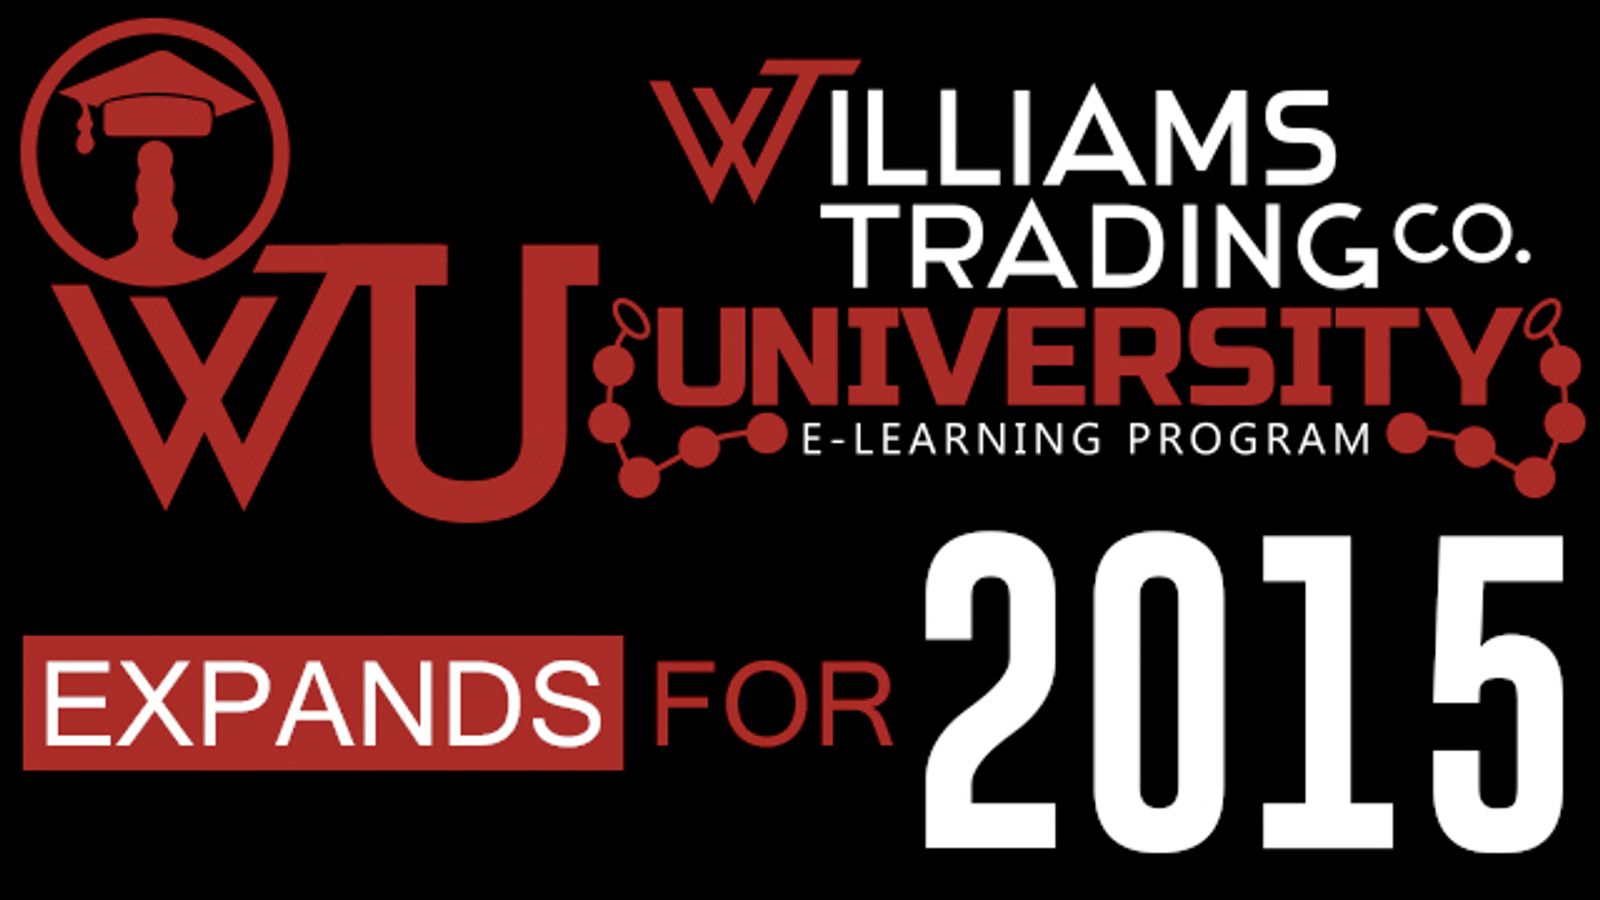 Williams Trading University Expands For 2015